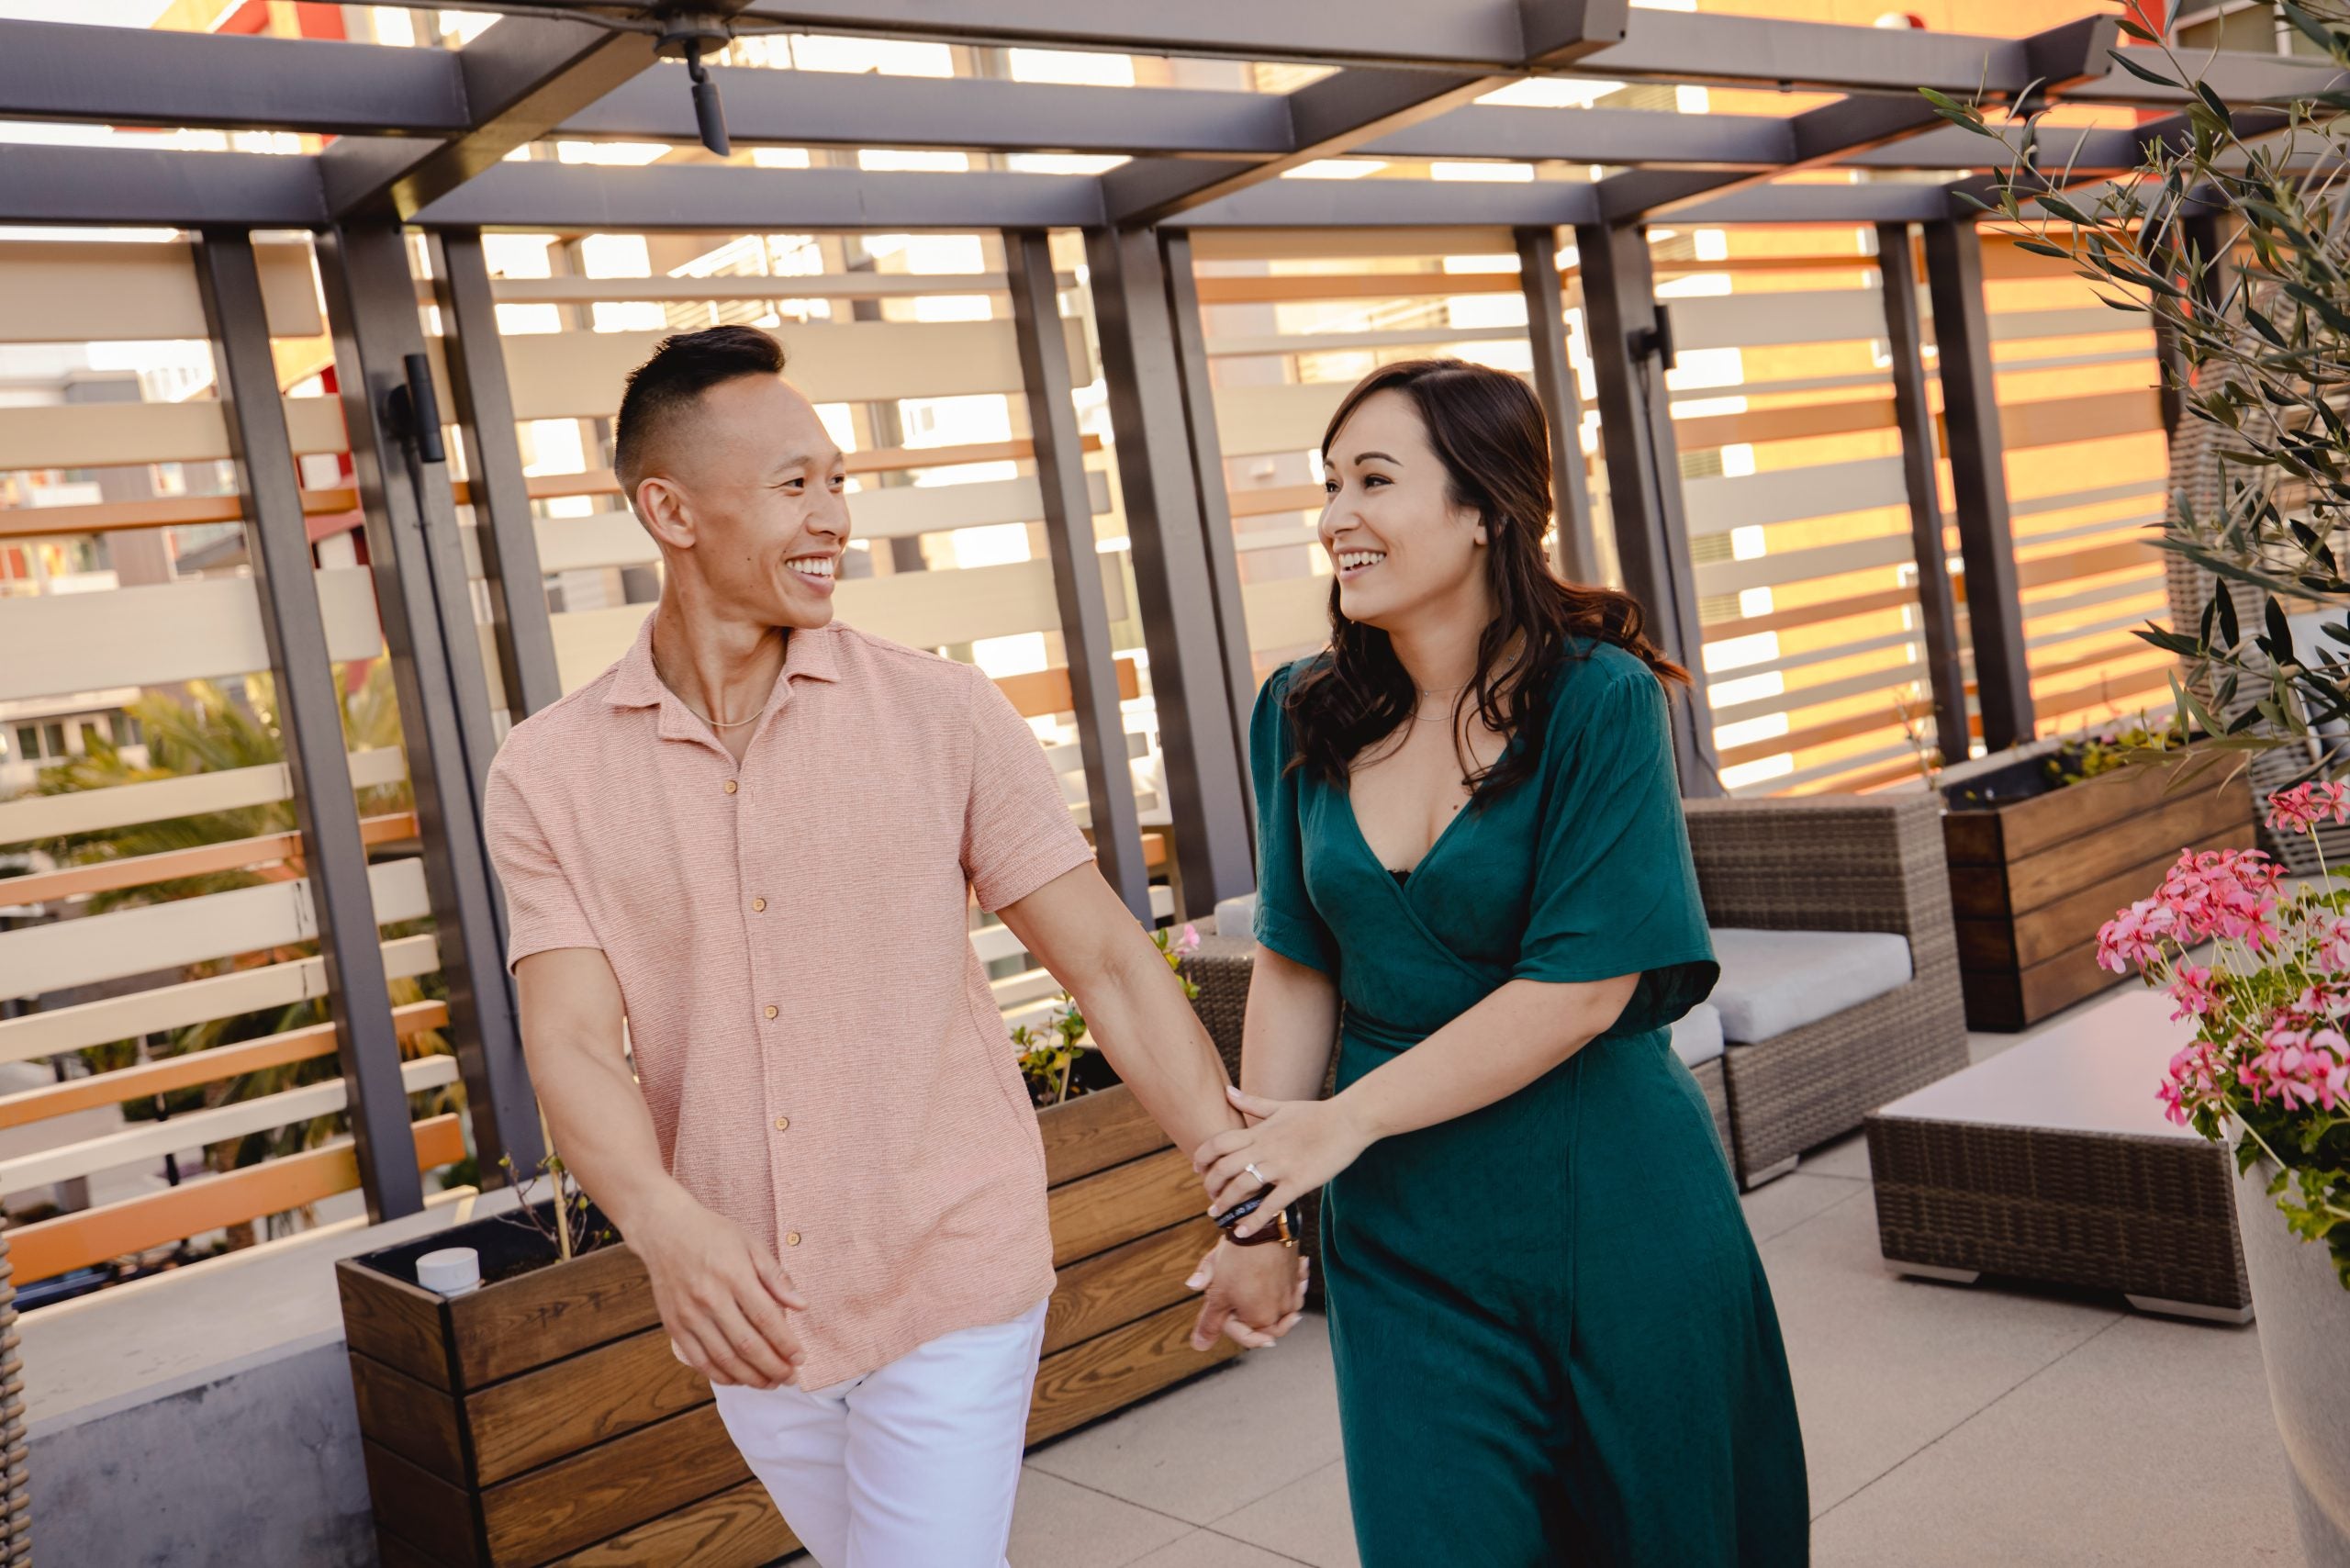 'Married at First Sight' Season 15 couple Binh and Morgan holding hands